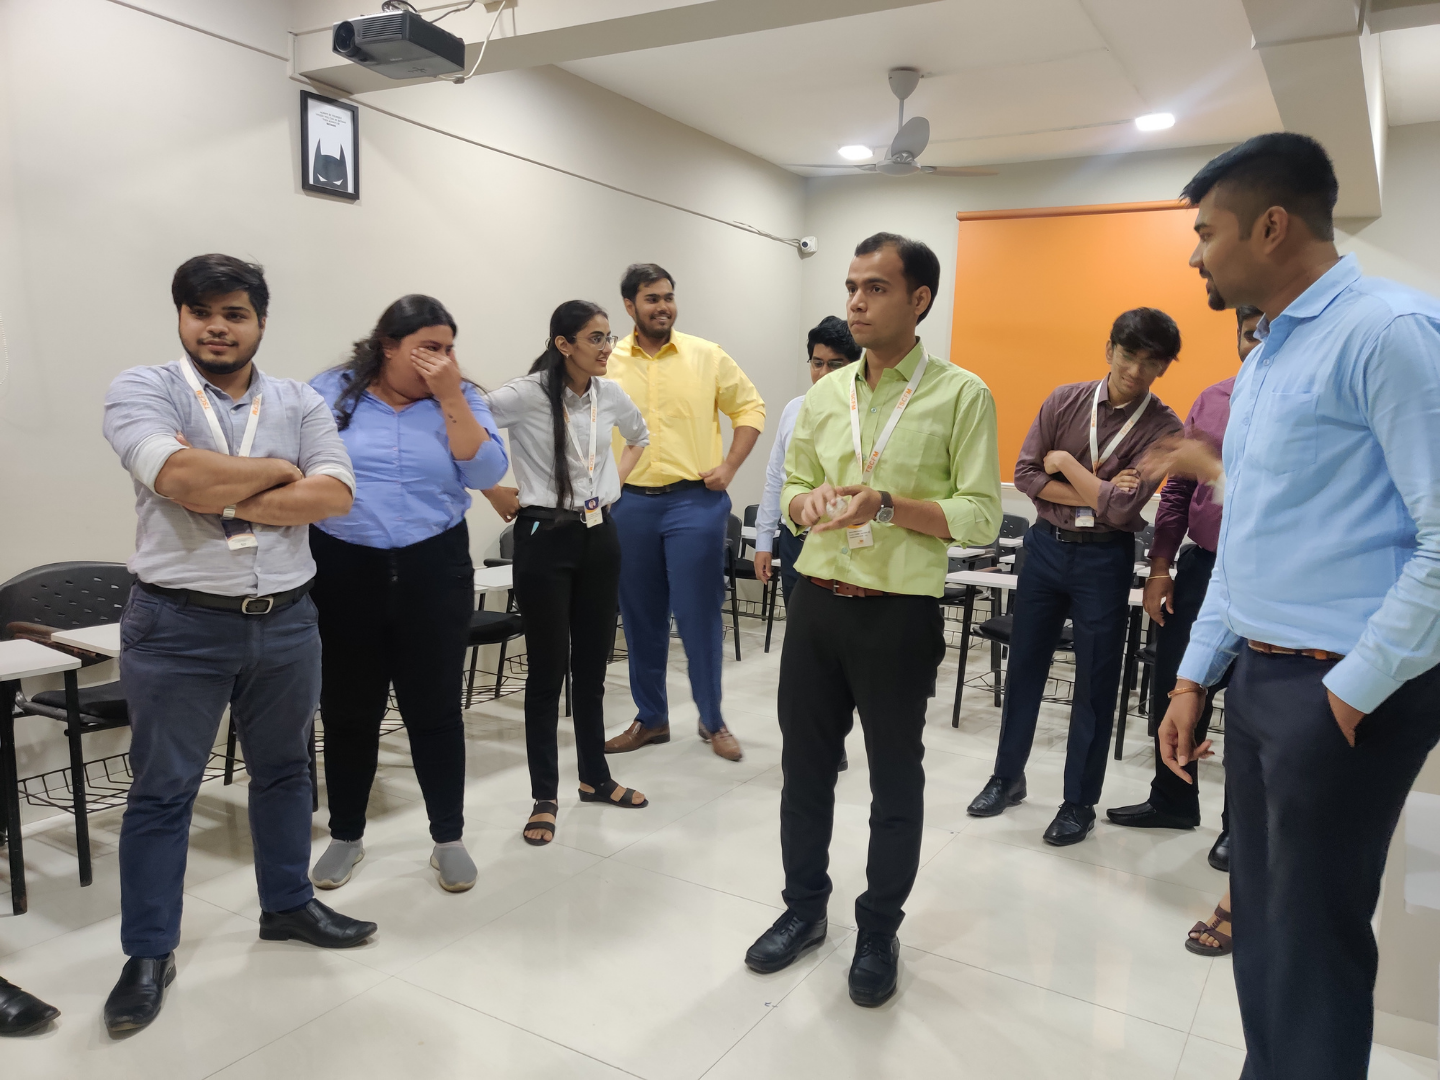 Risk-taking activity for First-year MBA students